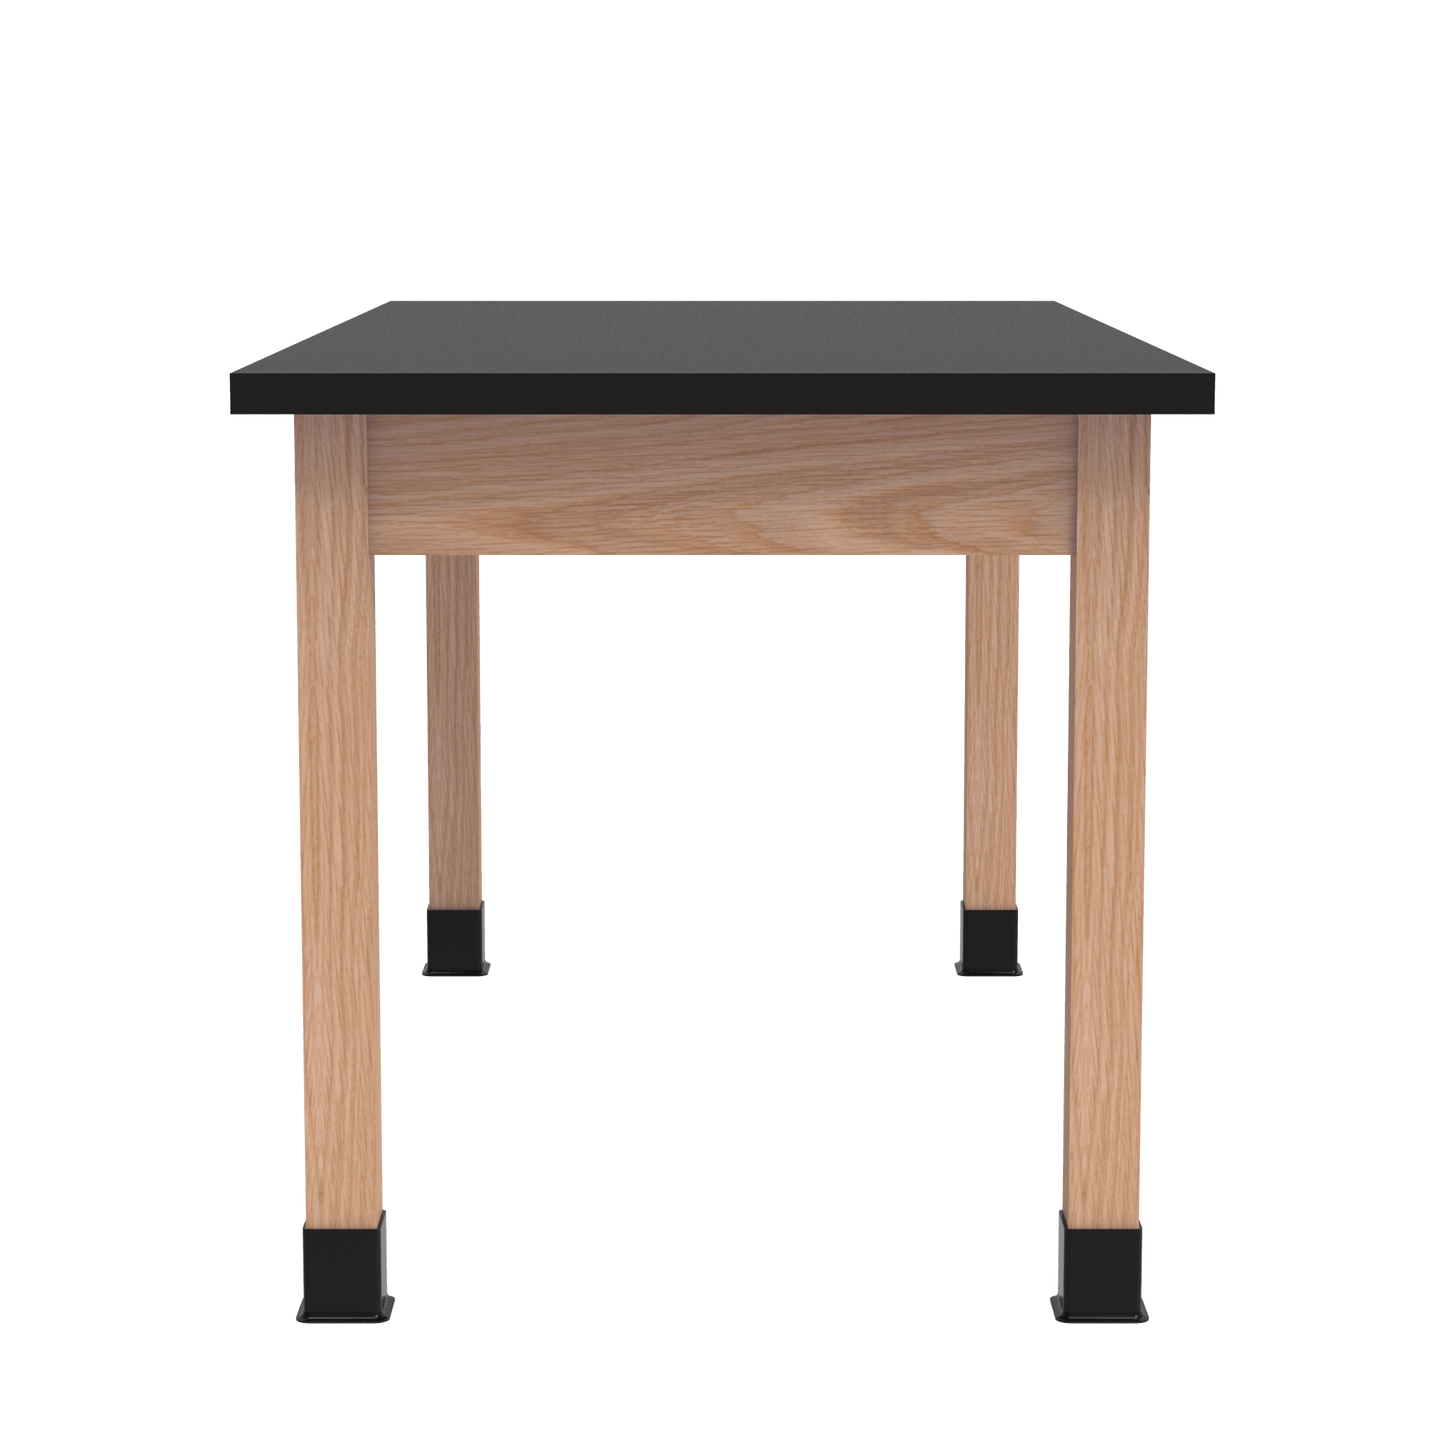 Diversified Woodcrafts Science Table w/ Book Compartment - 72" W x 21" D - Solid Oak Frame and Adjustable Glides - SchoolOutlet